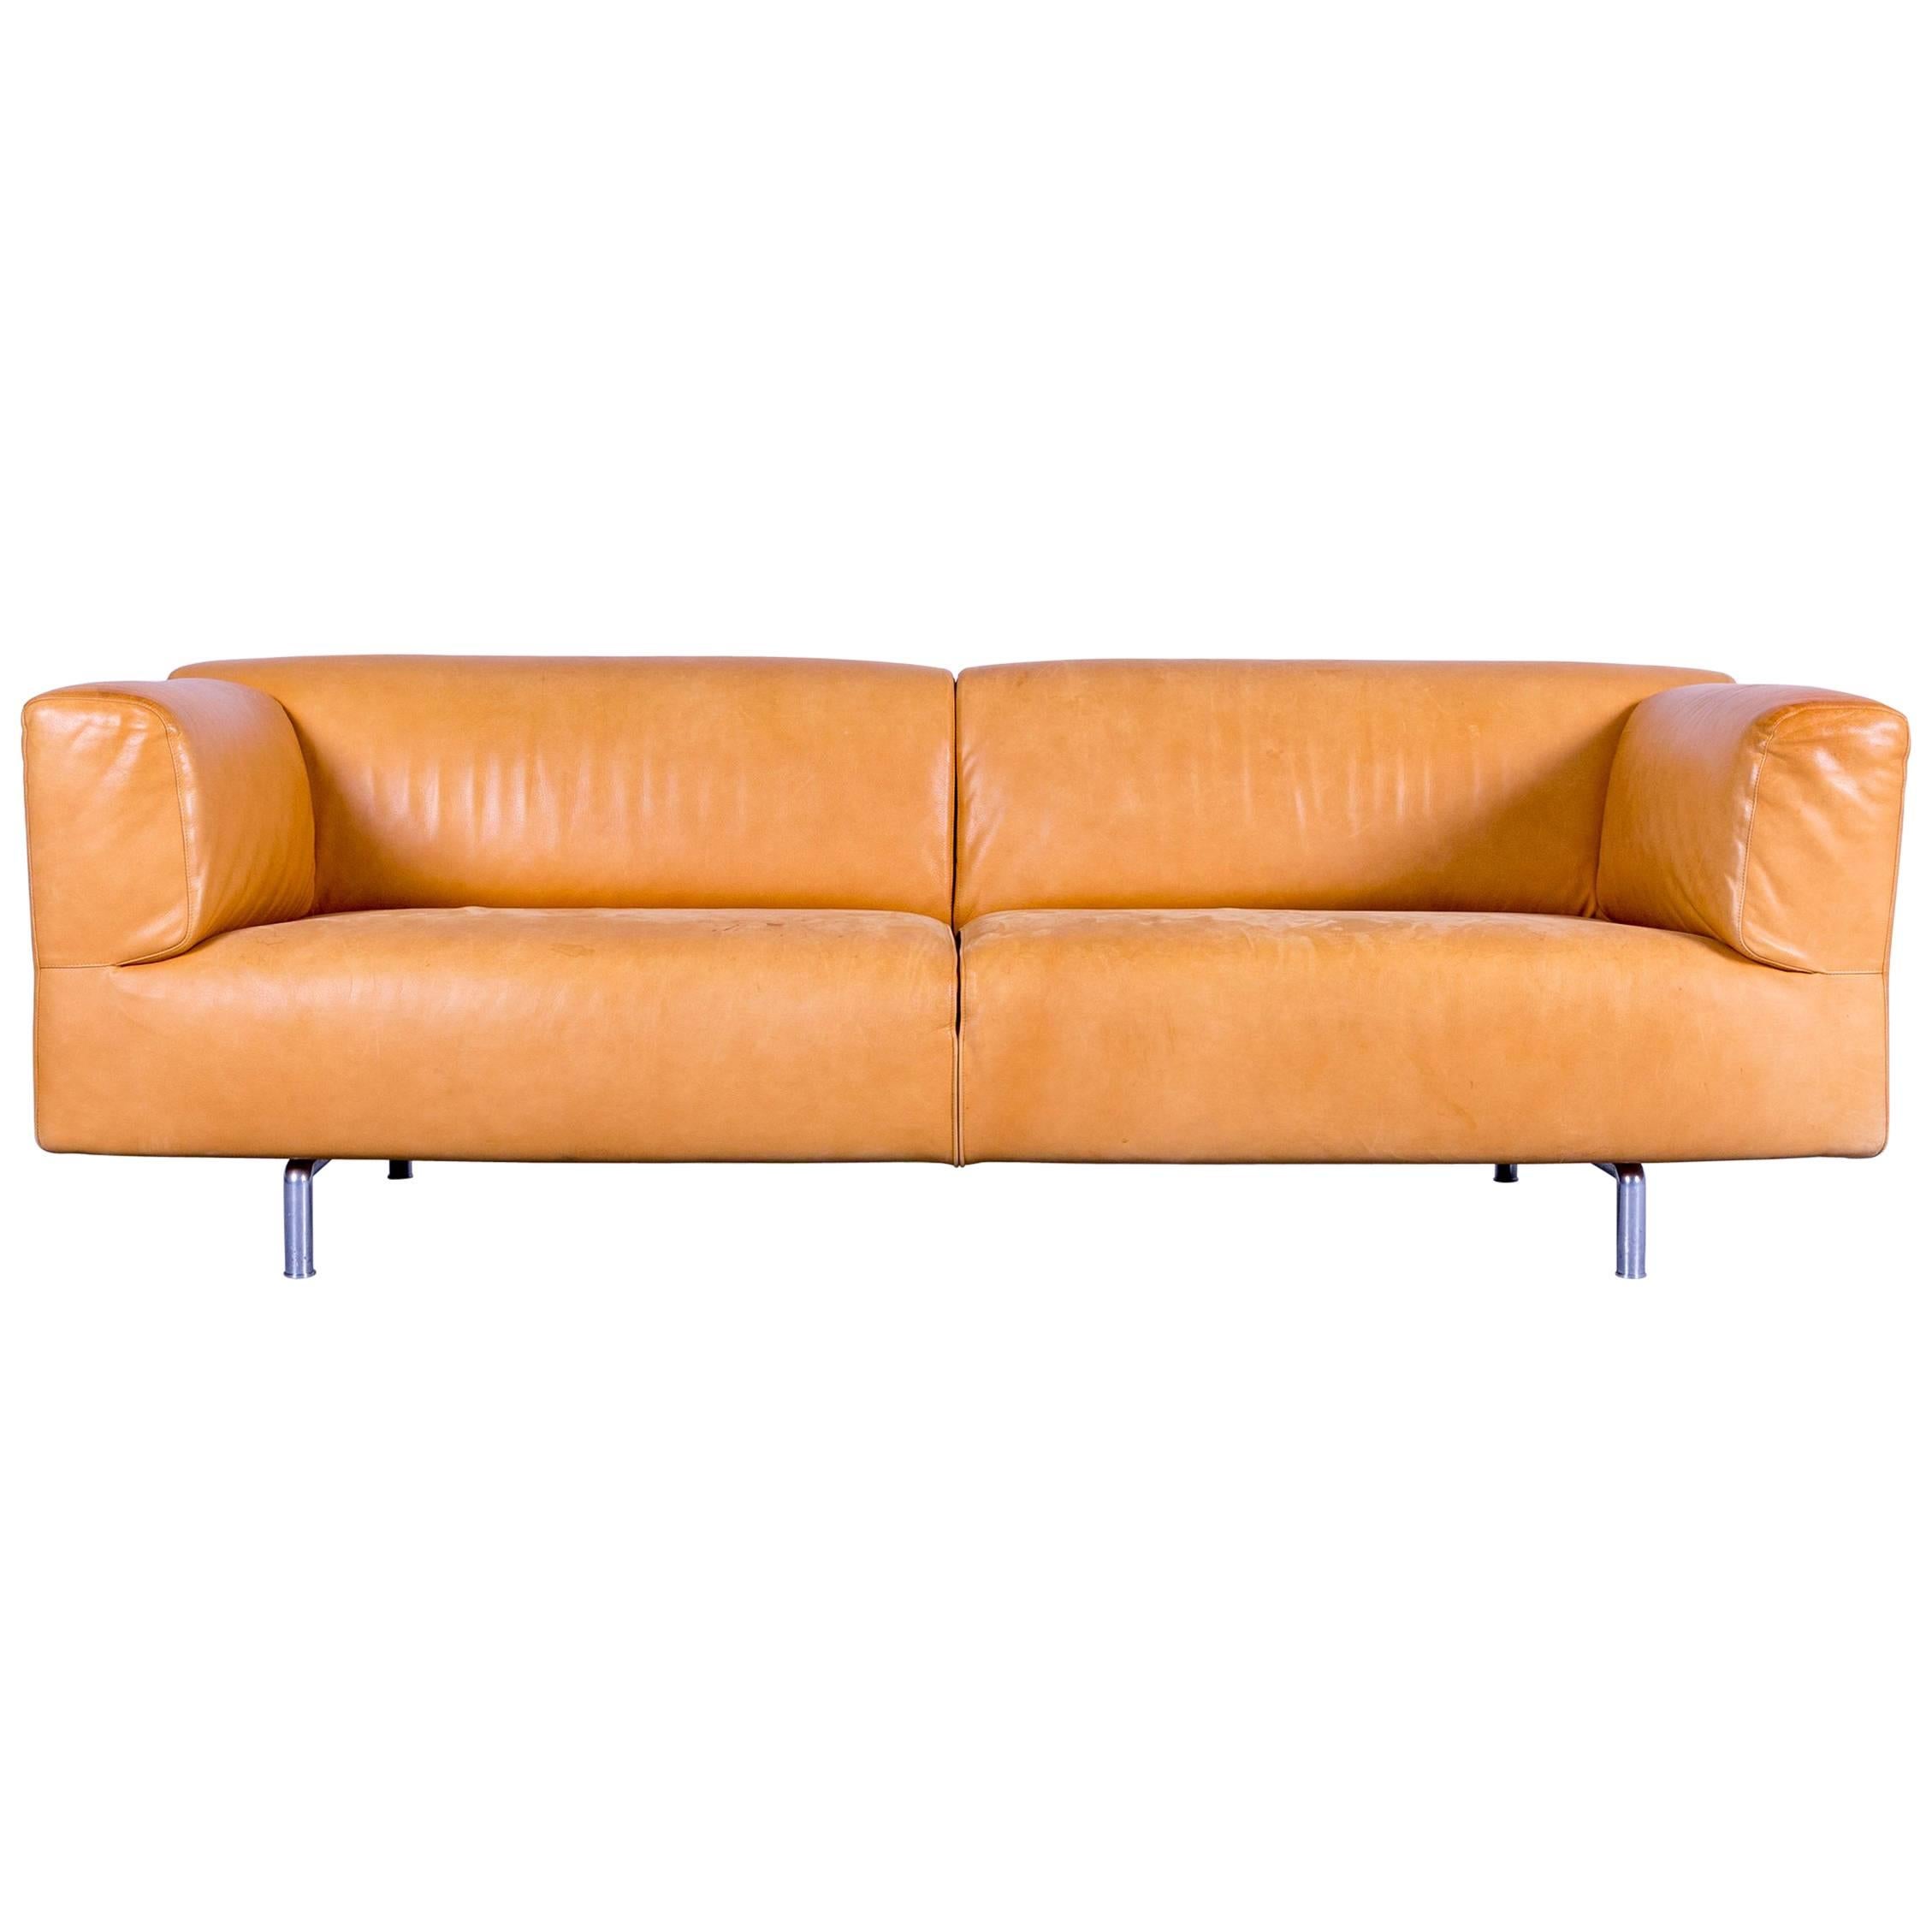 Cassina Met Leather Sofa Cognac Brown Three-Seat Couch Modern